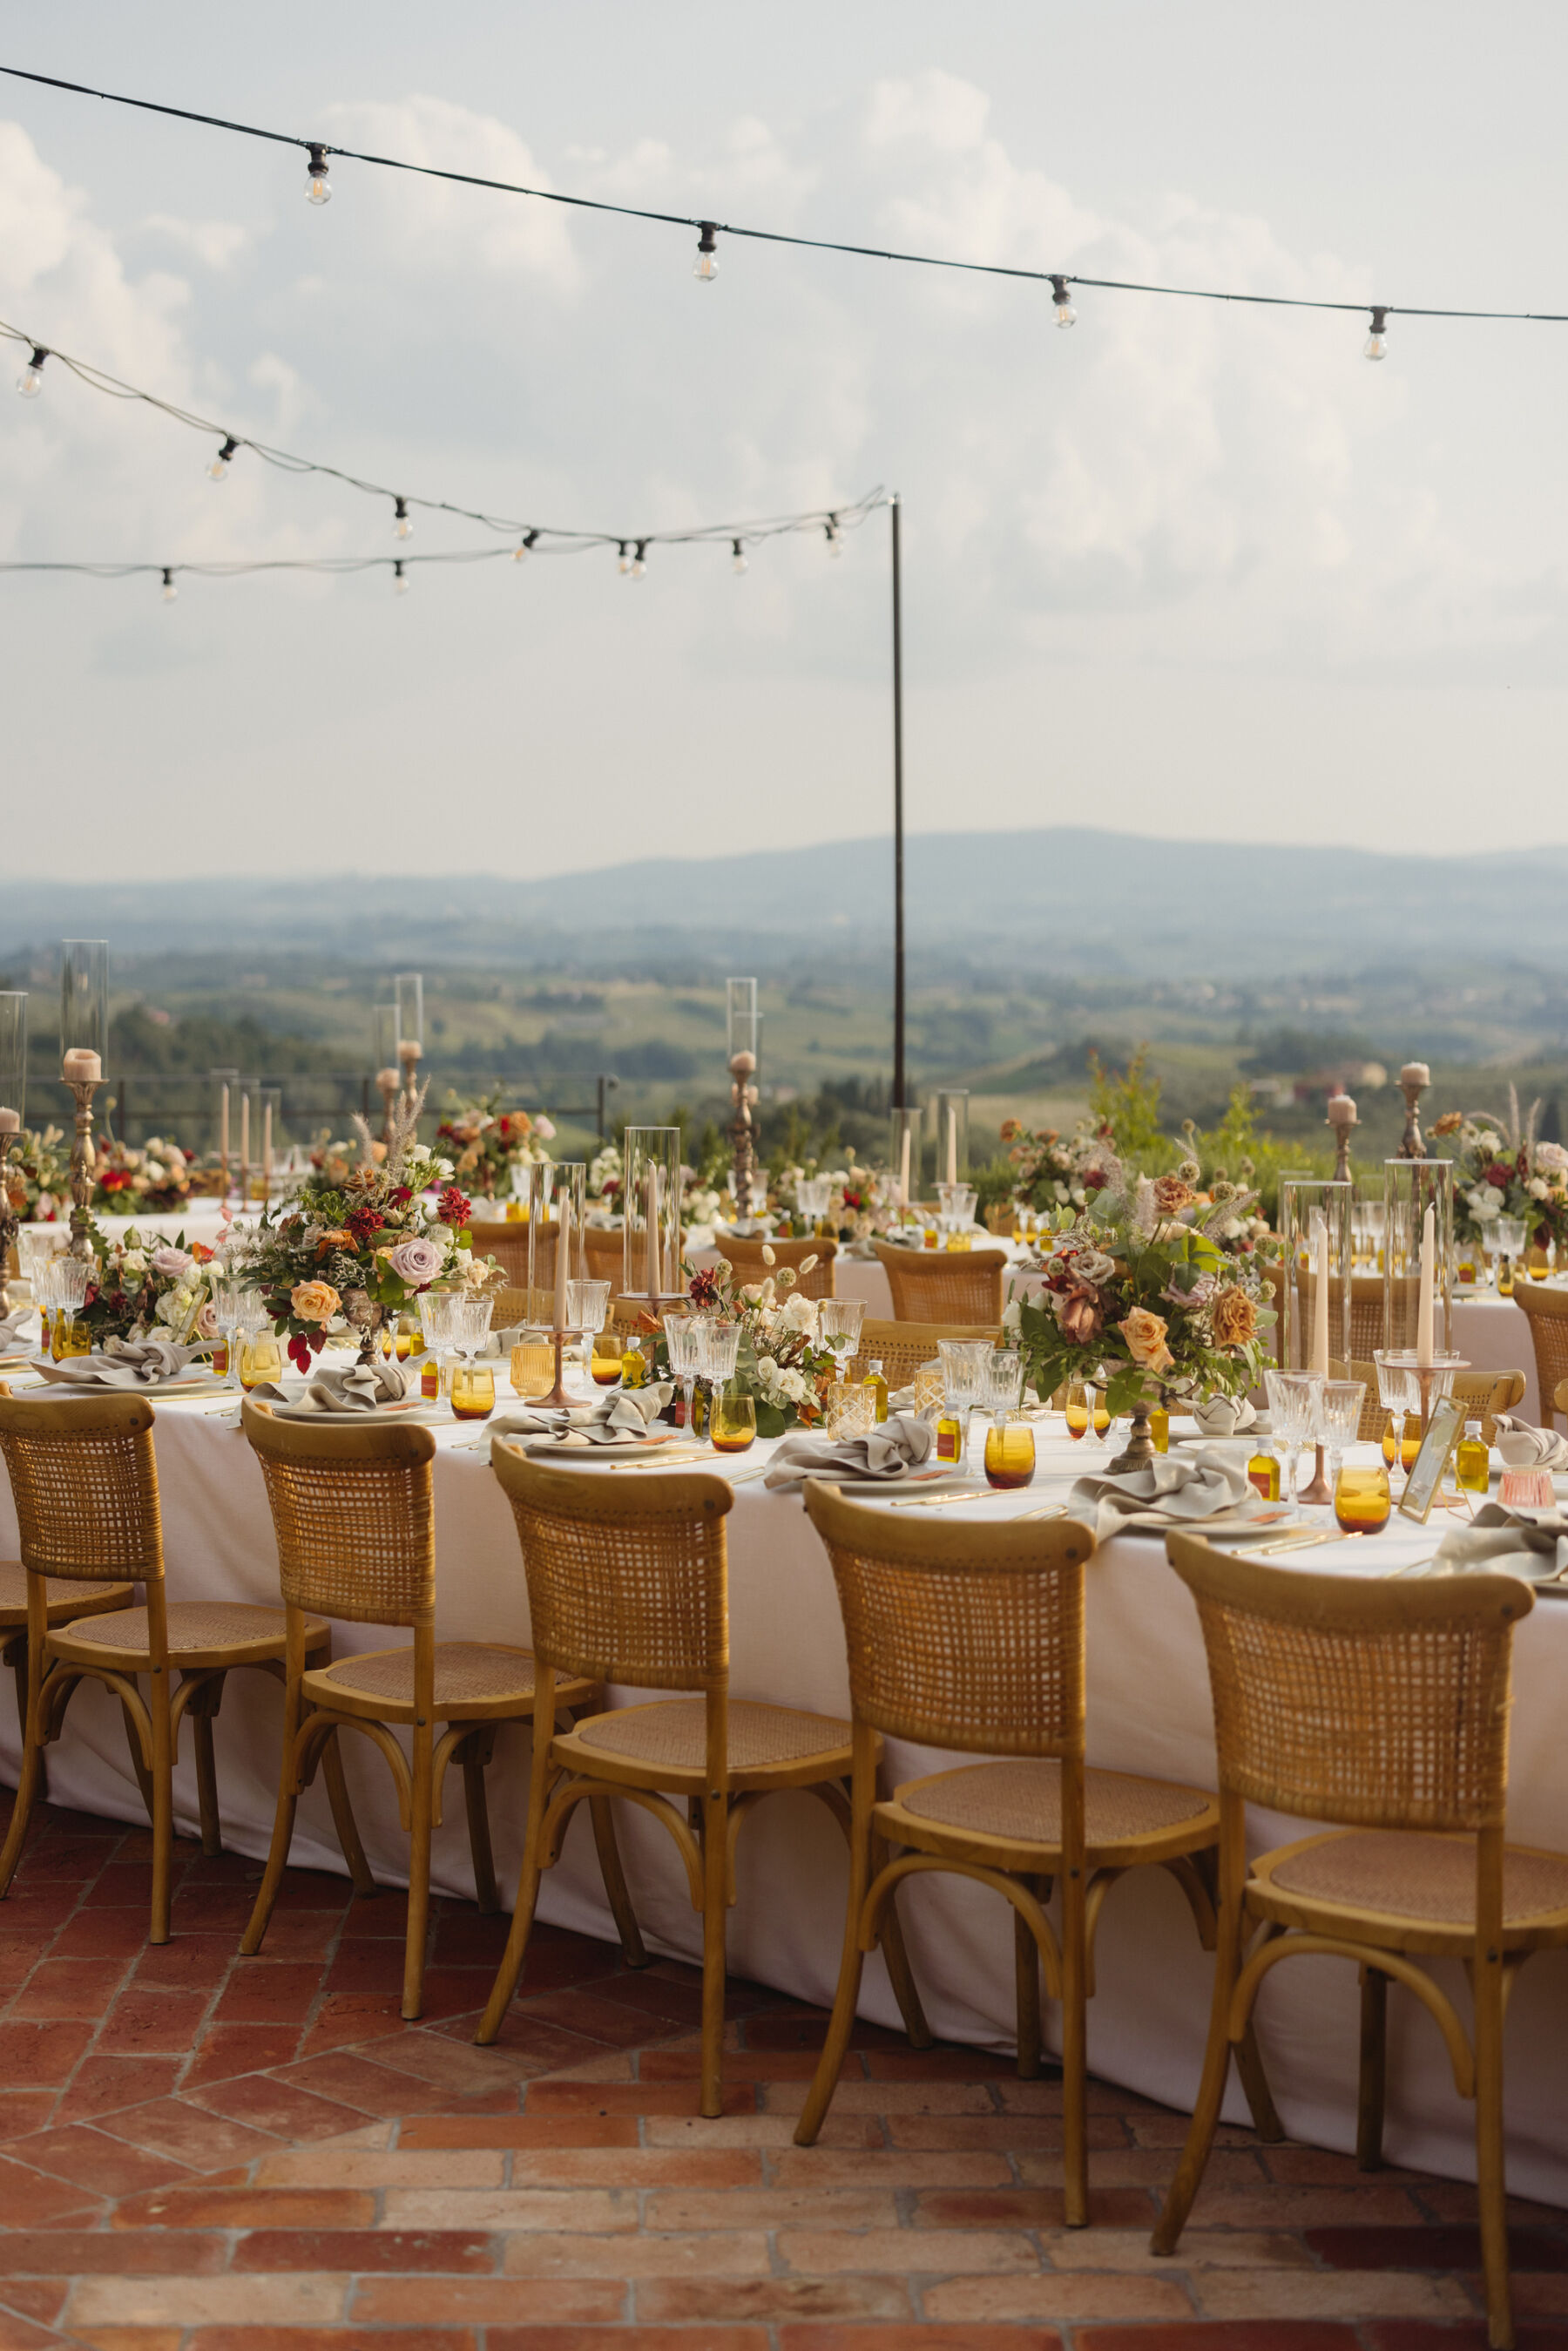 Outdoor wedding reception table setup - wedding in Italy. Wooden chairs surrounding a long table that has colourful summer floral decor in the centre and crisp white table cloths. The table has festoon lights draped above it to add ambience in the evening.